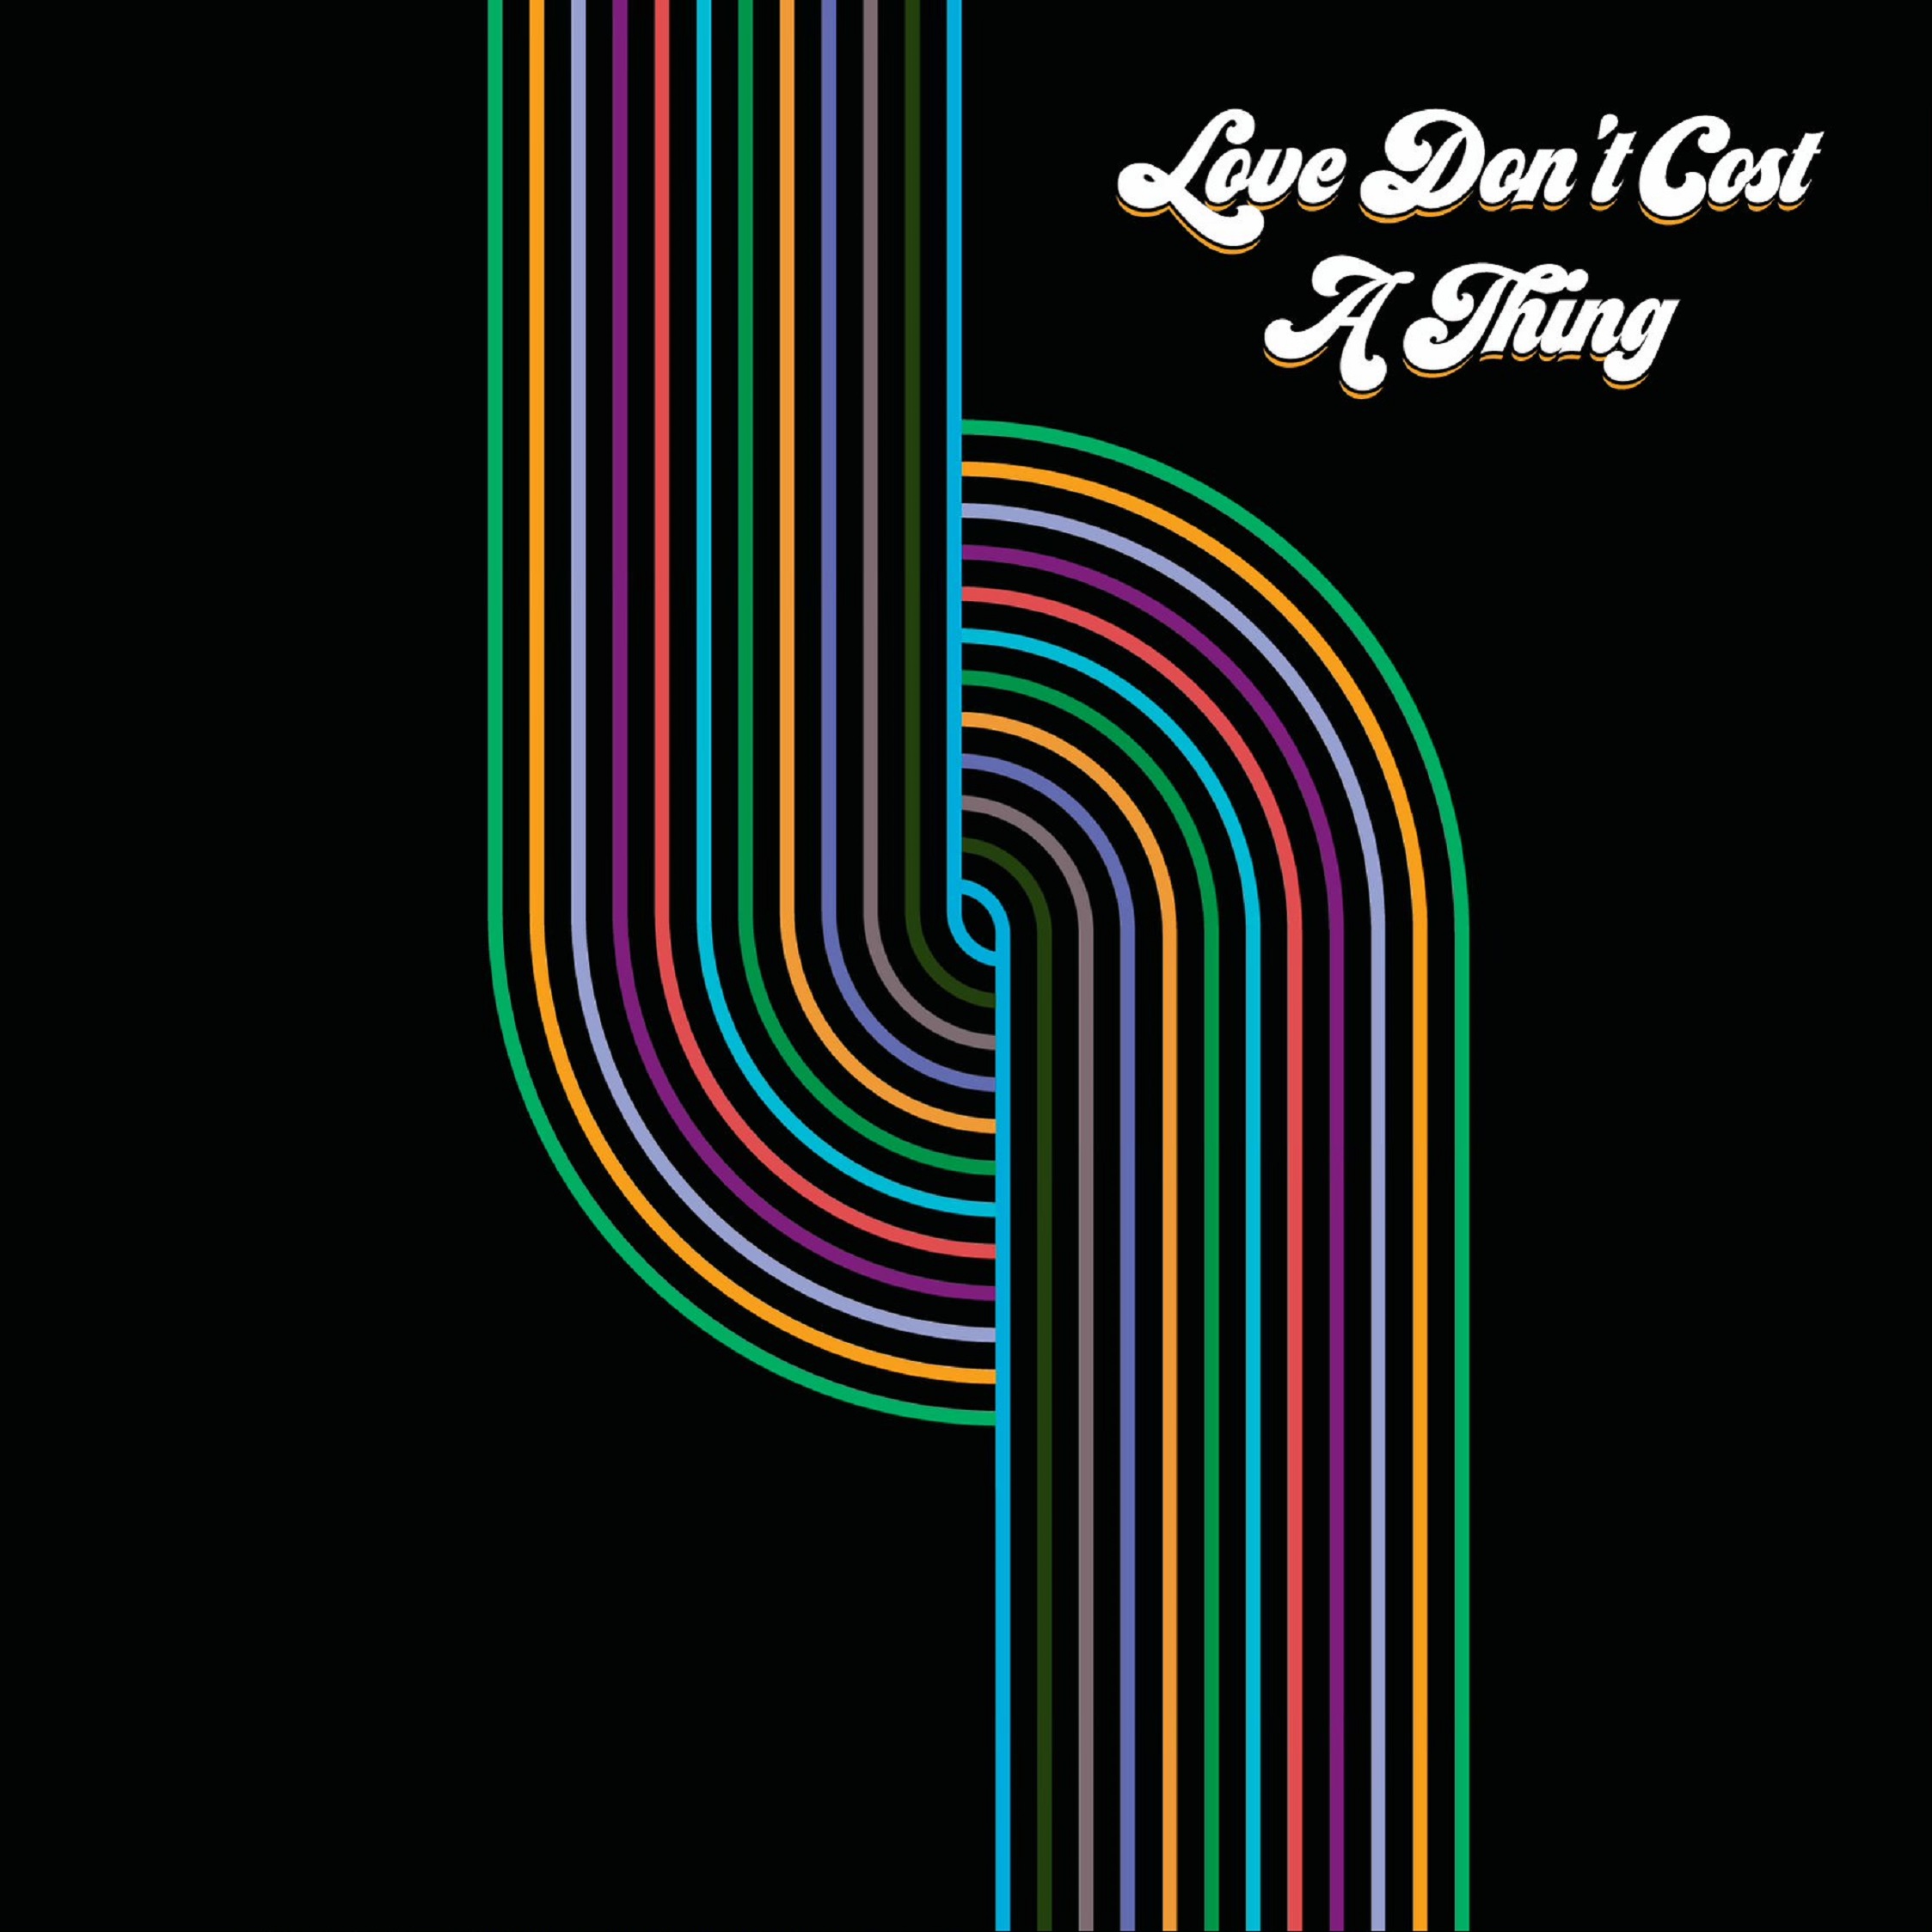 THE FUNKY DAWGZ RETURN WITH “LOVE DON’T COST A THING” SINGLE